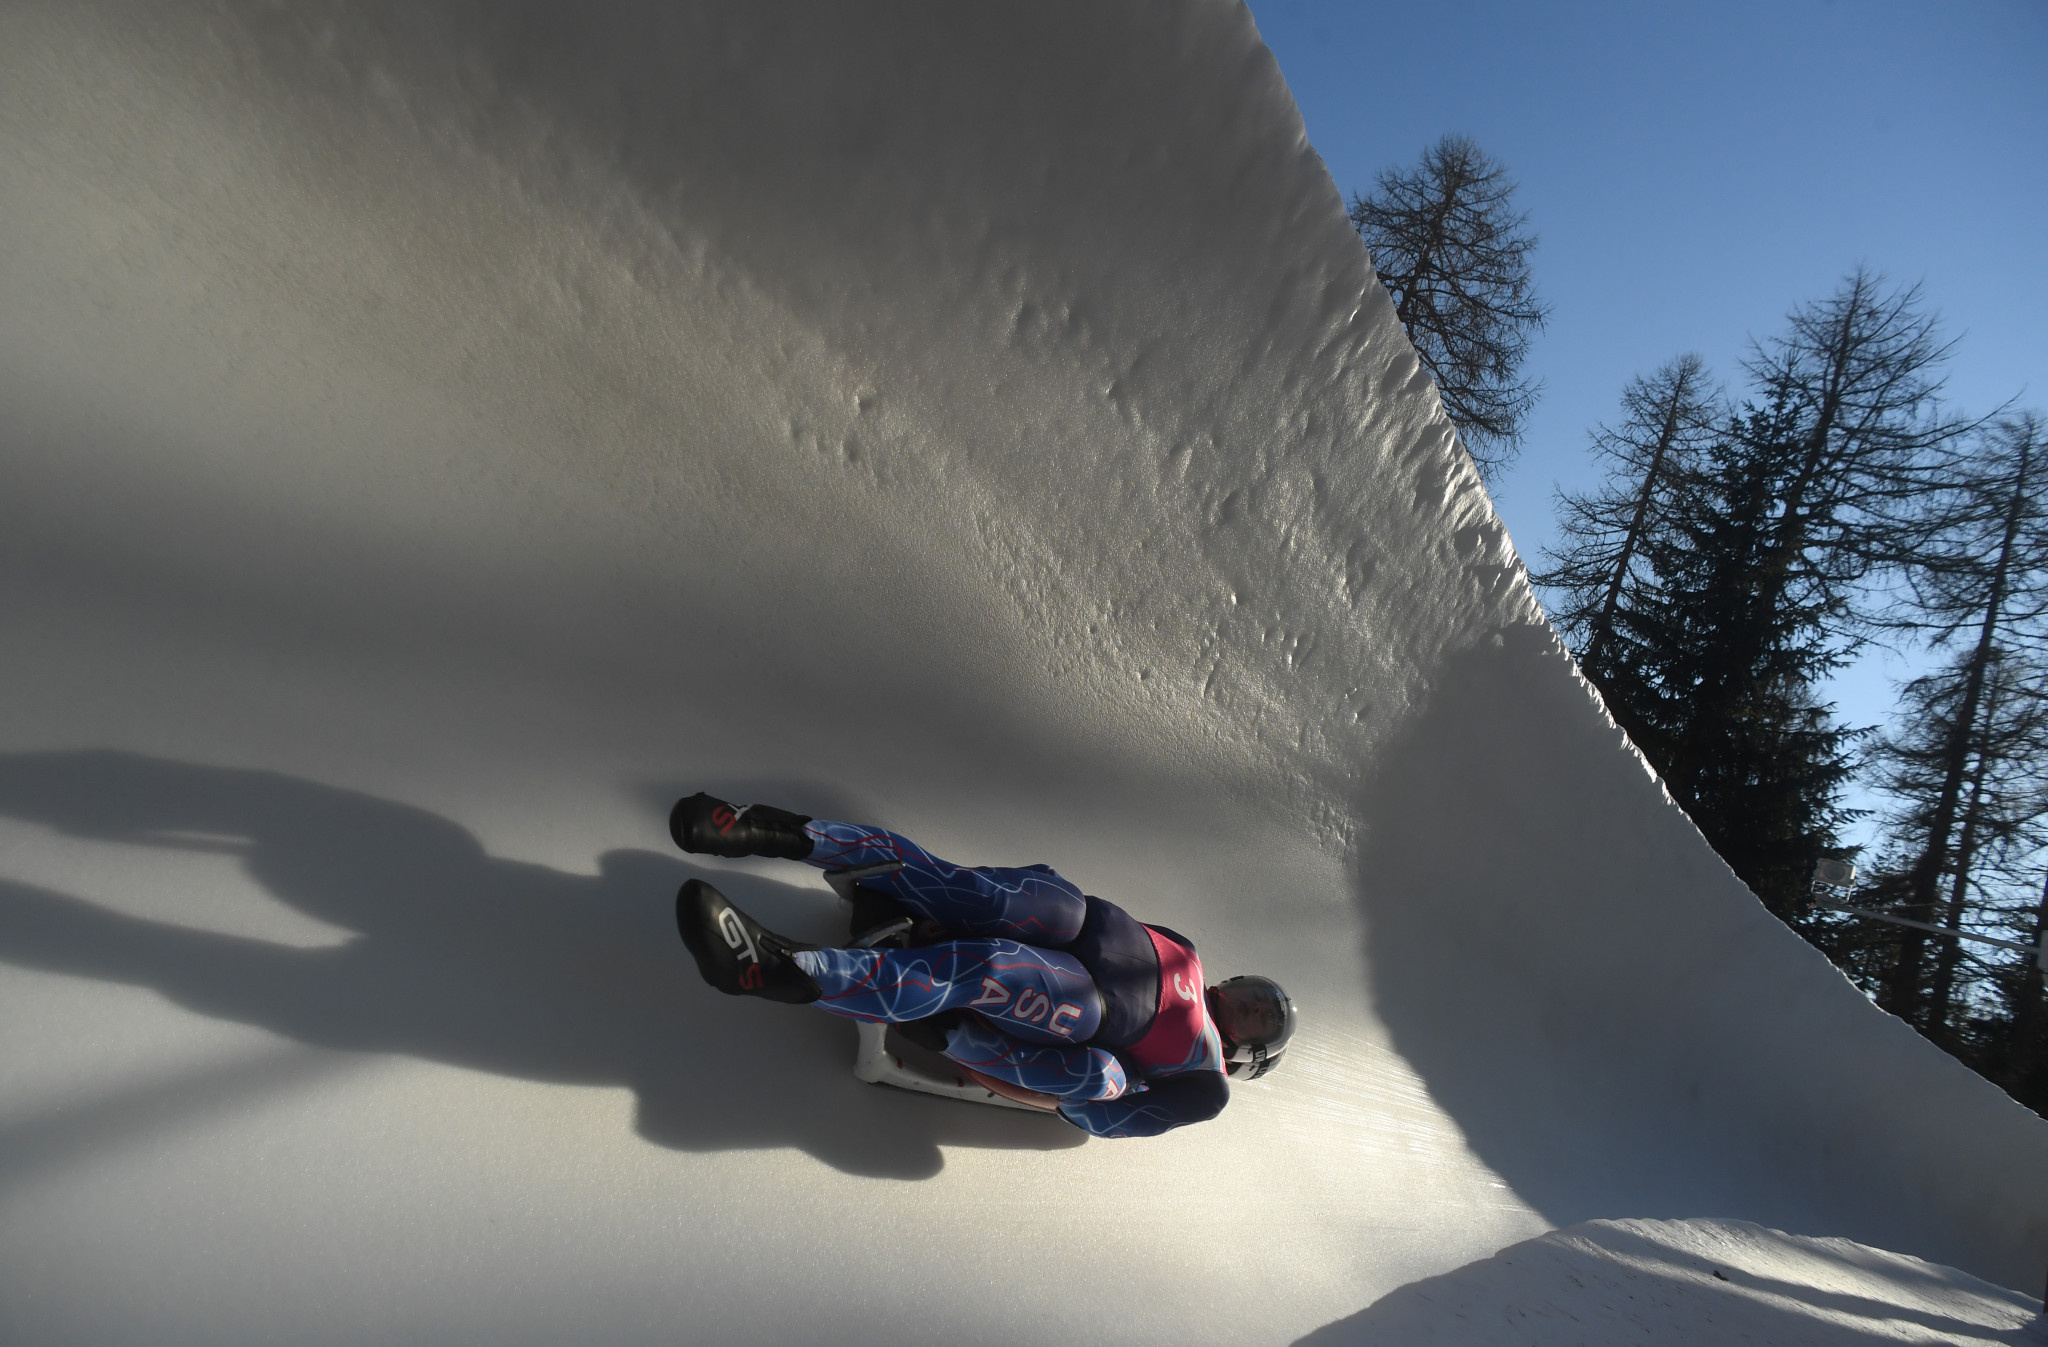 Luge: An American luger slides down an iced track at the competition, Winter sports discipline. 2050x1350 HD Wallpaper.